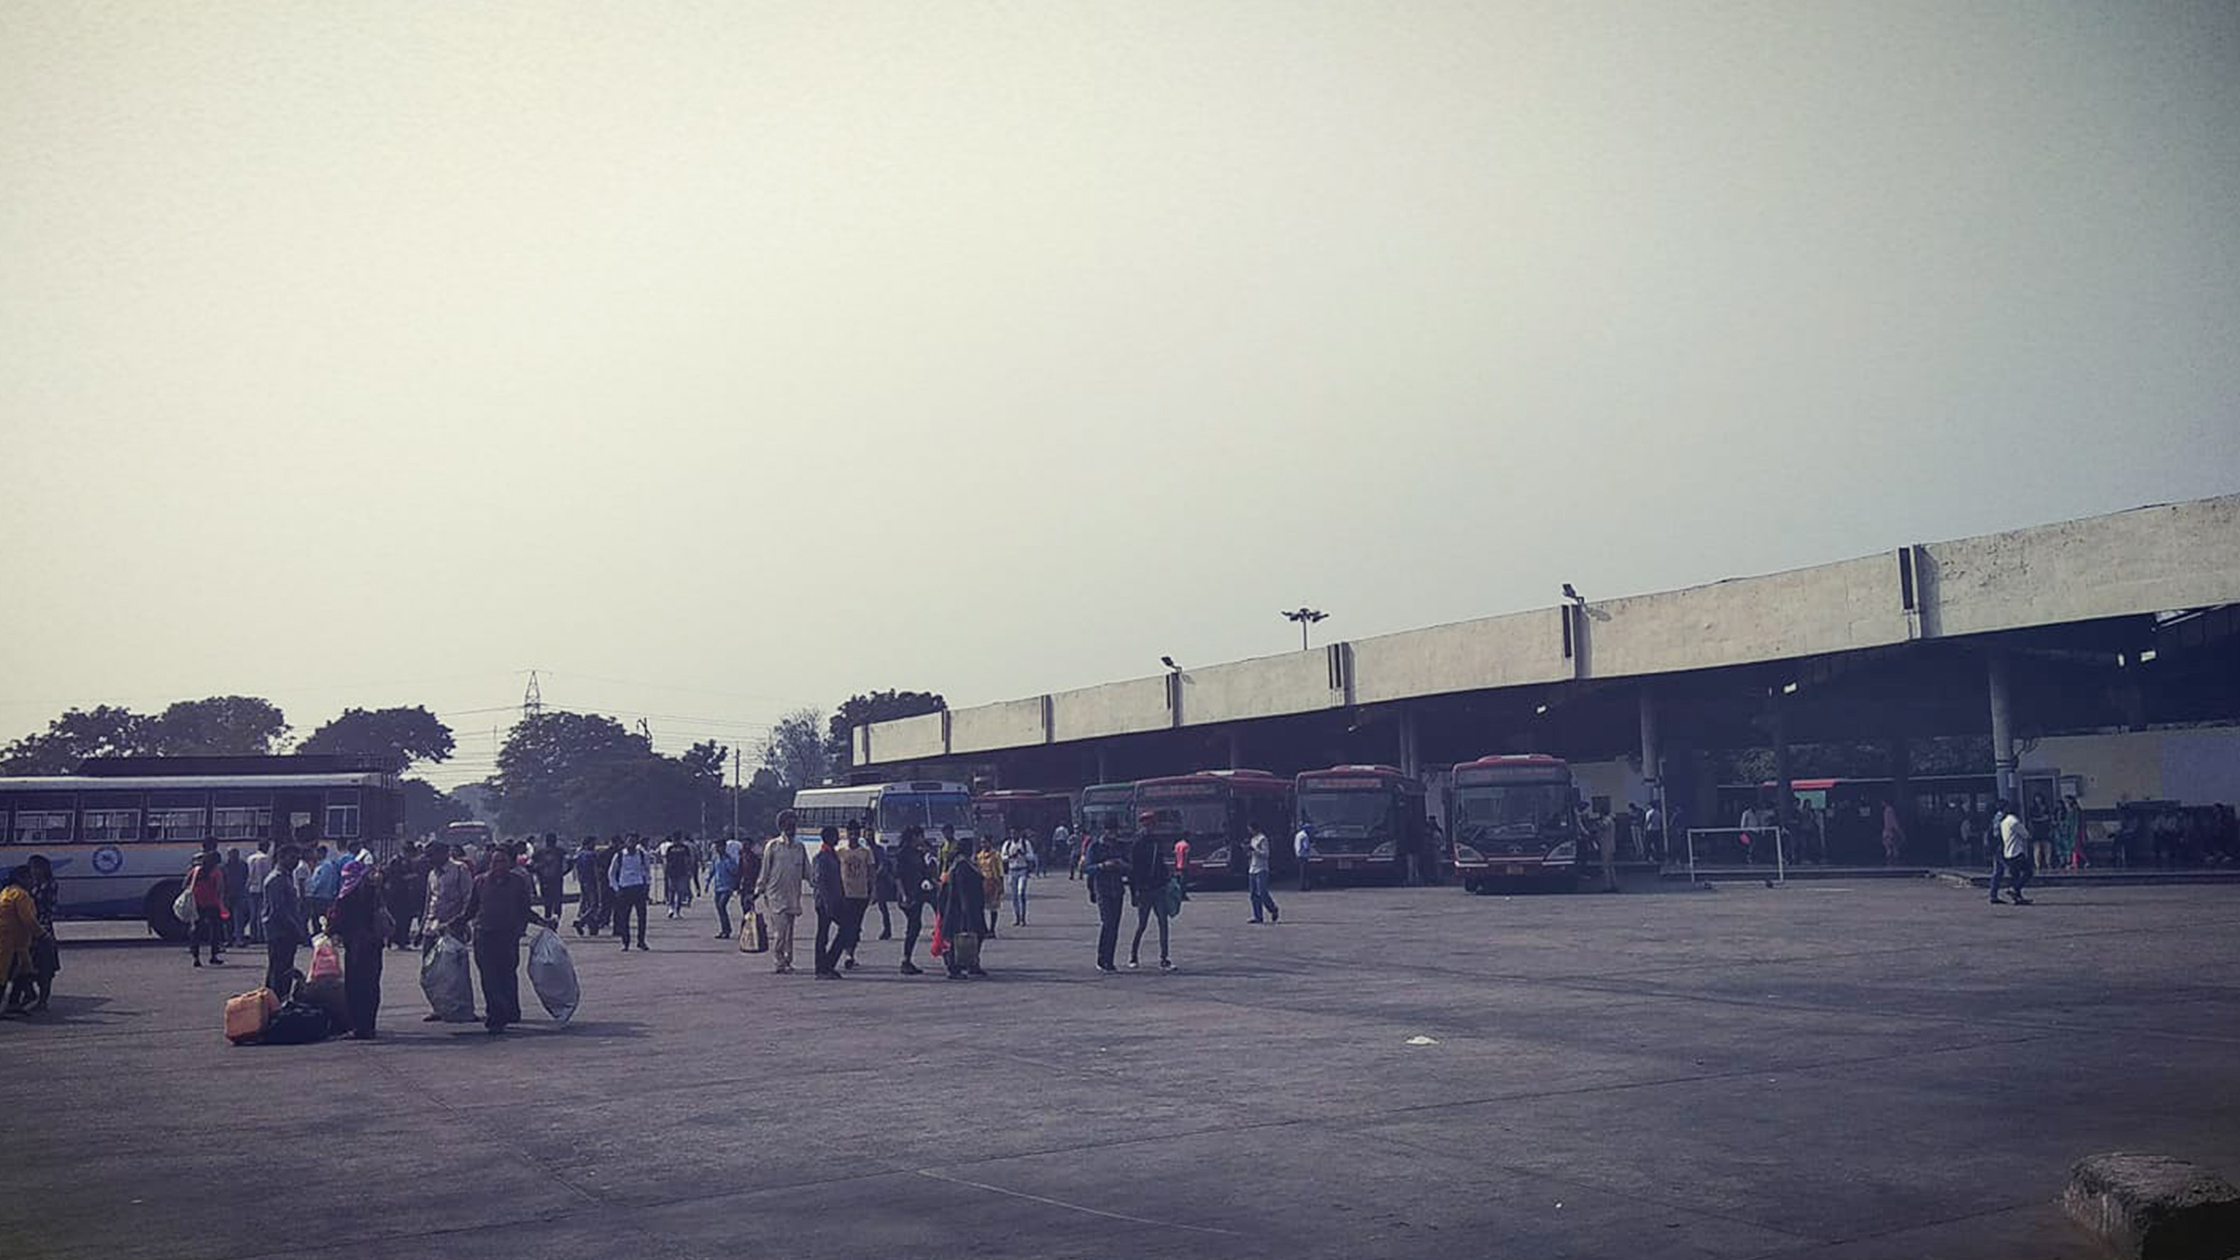 Bus Stand of Mohali for taking a bus to cover Mohali Chandigarh Distance